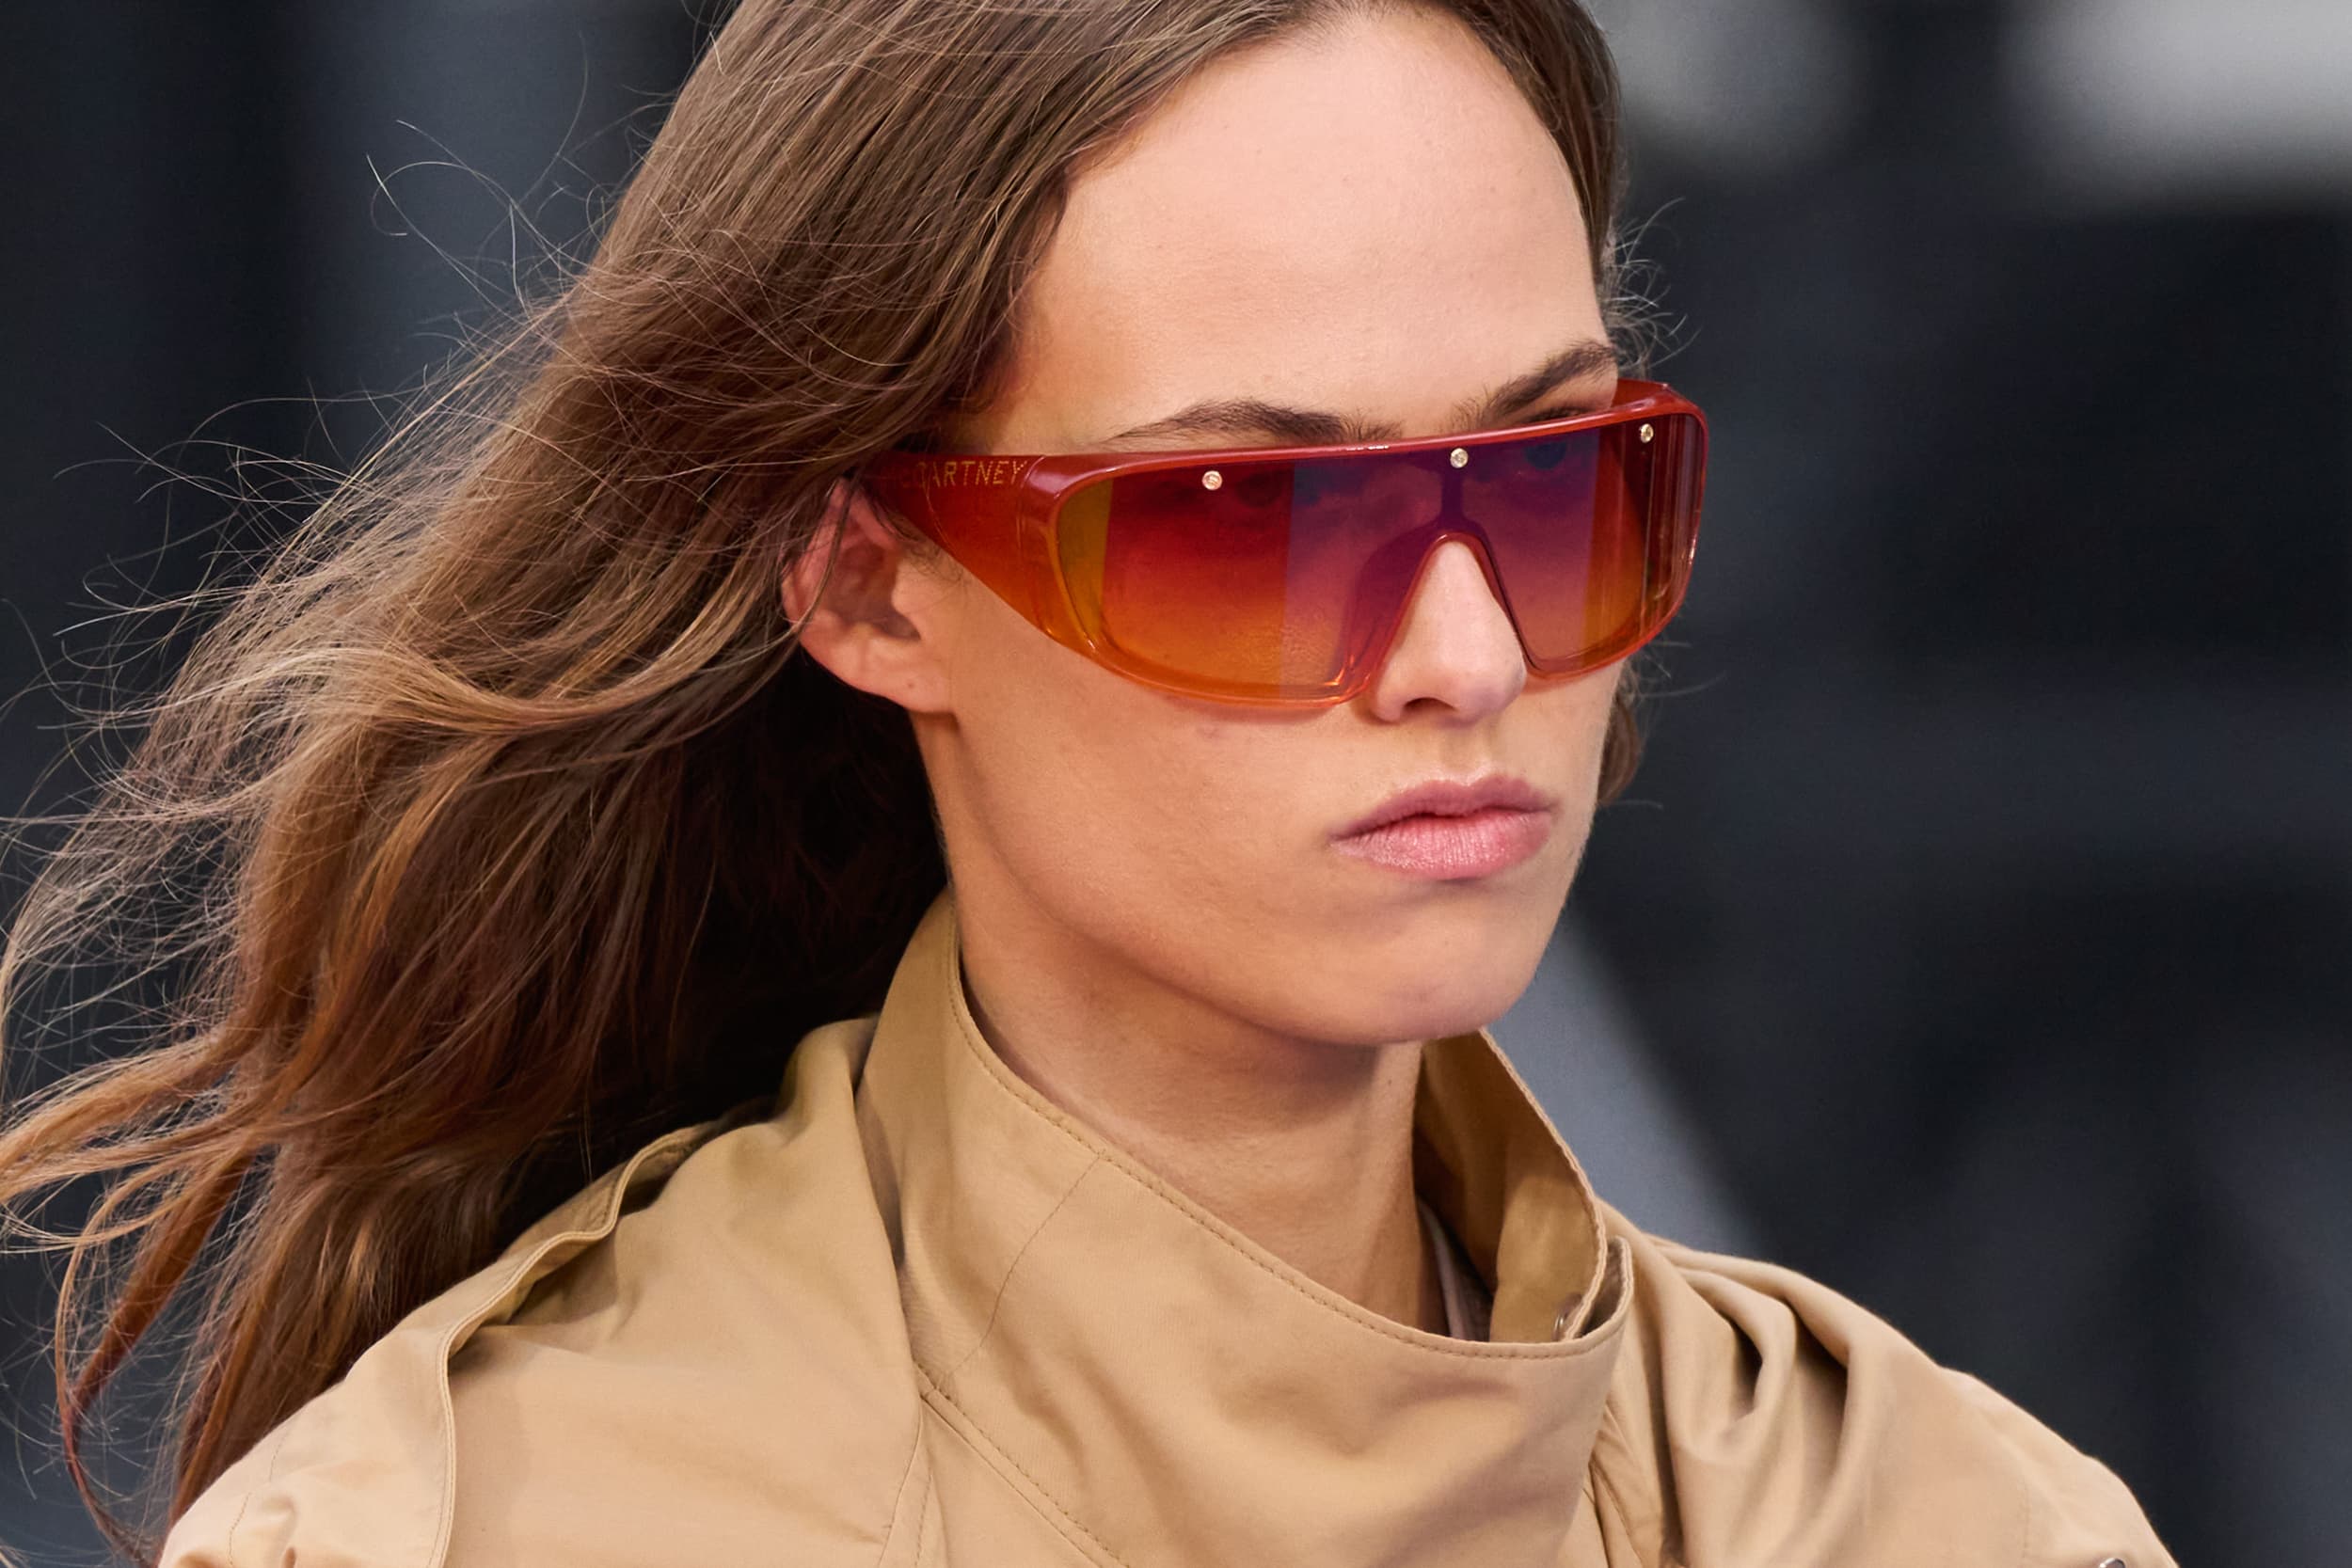 The Sporty Sunglasses Co-opted by Fashion and Fascism - Fashionista